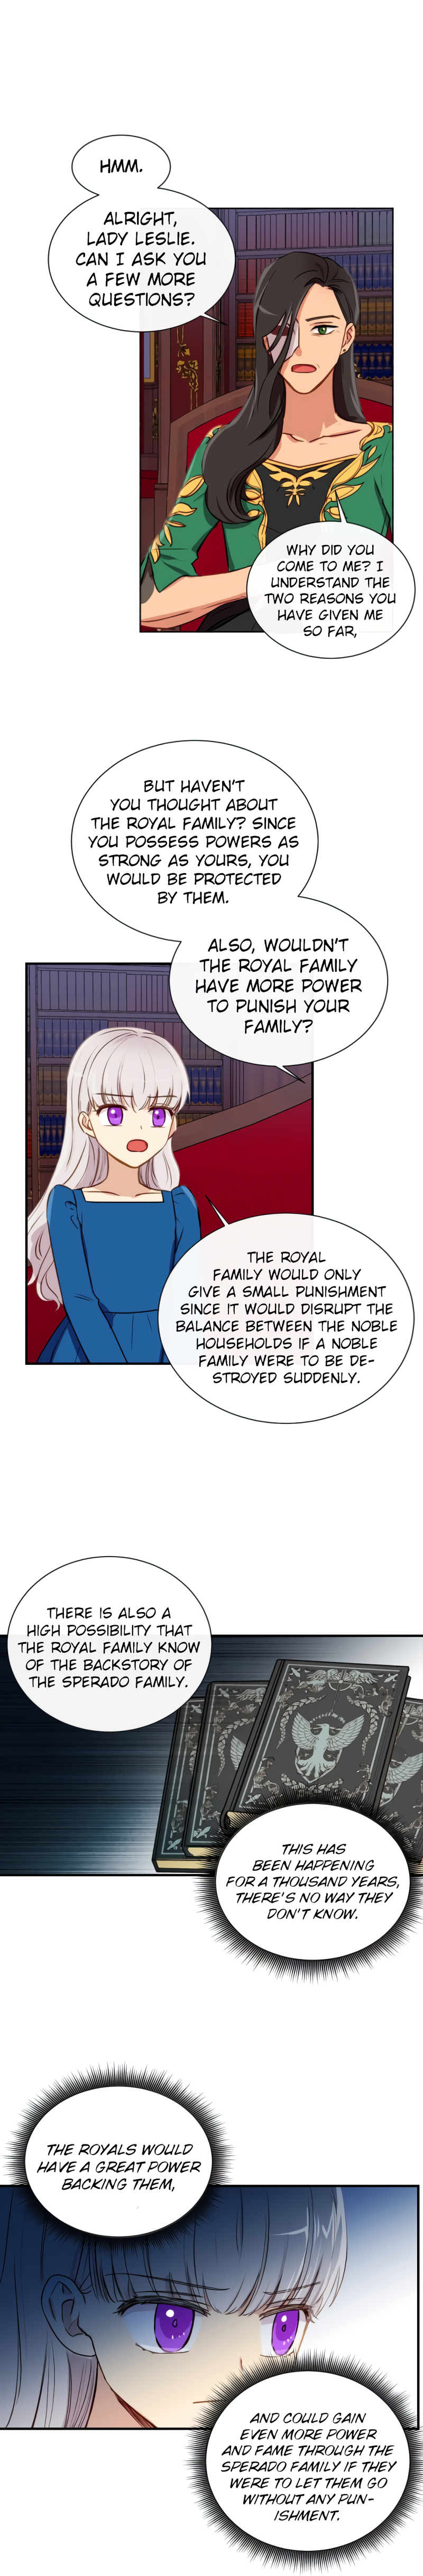 The Monster Duchess and Contract Princess chapter 8